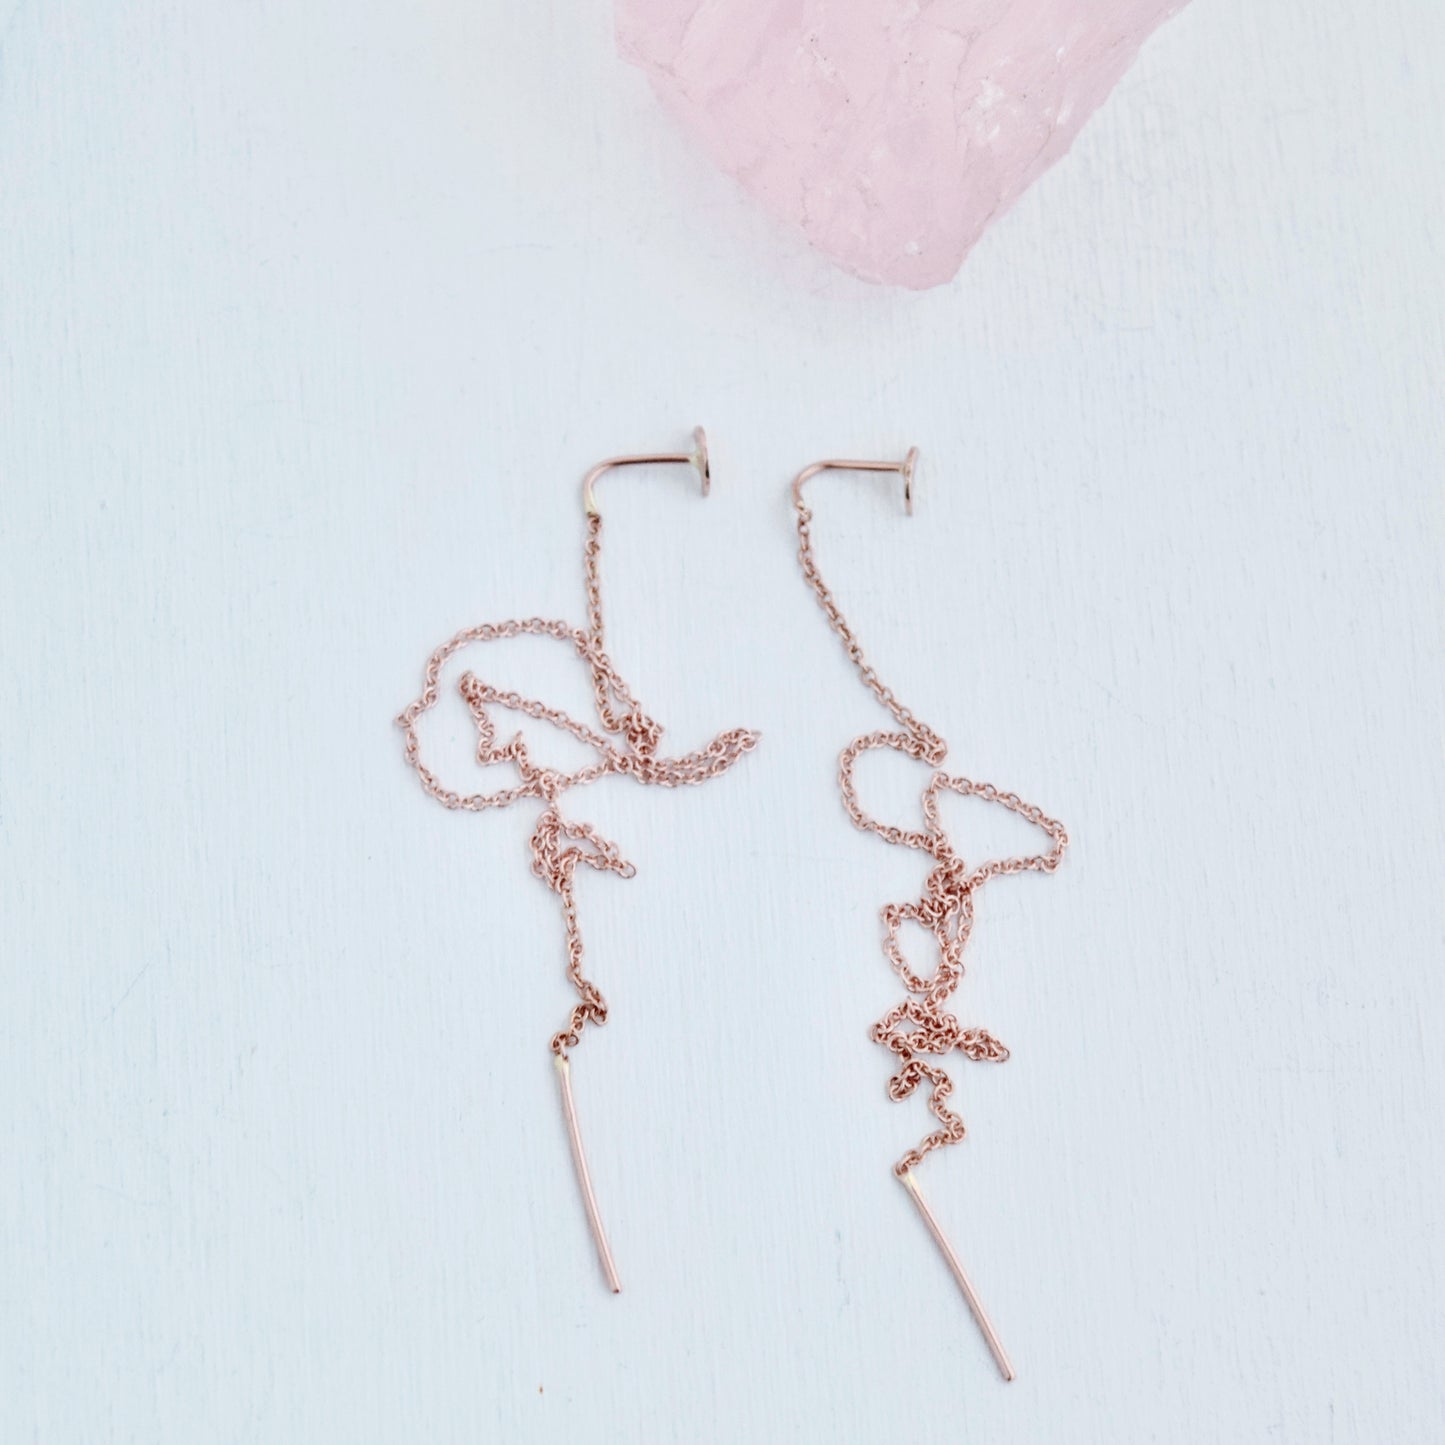 Made-to-Order 14k Solid Rose Gold Crescent Moon Ear Threaders